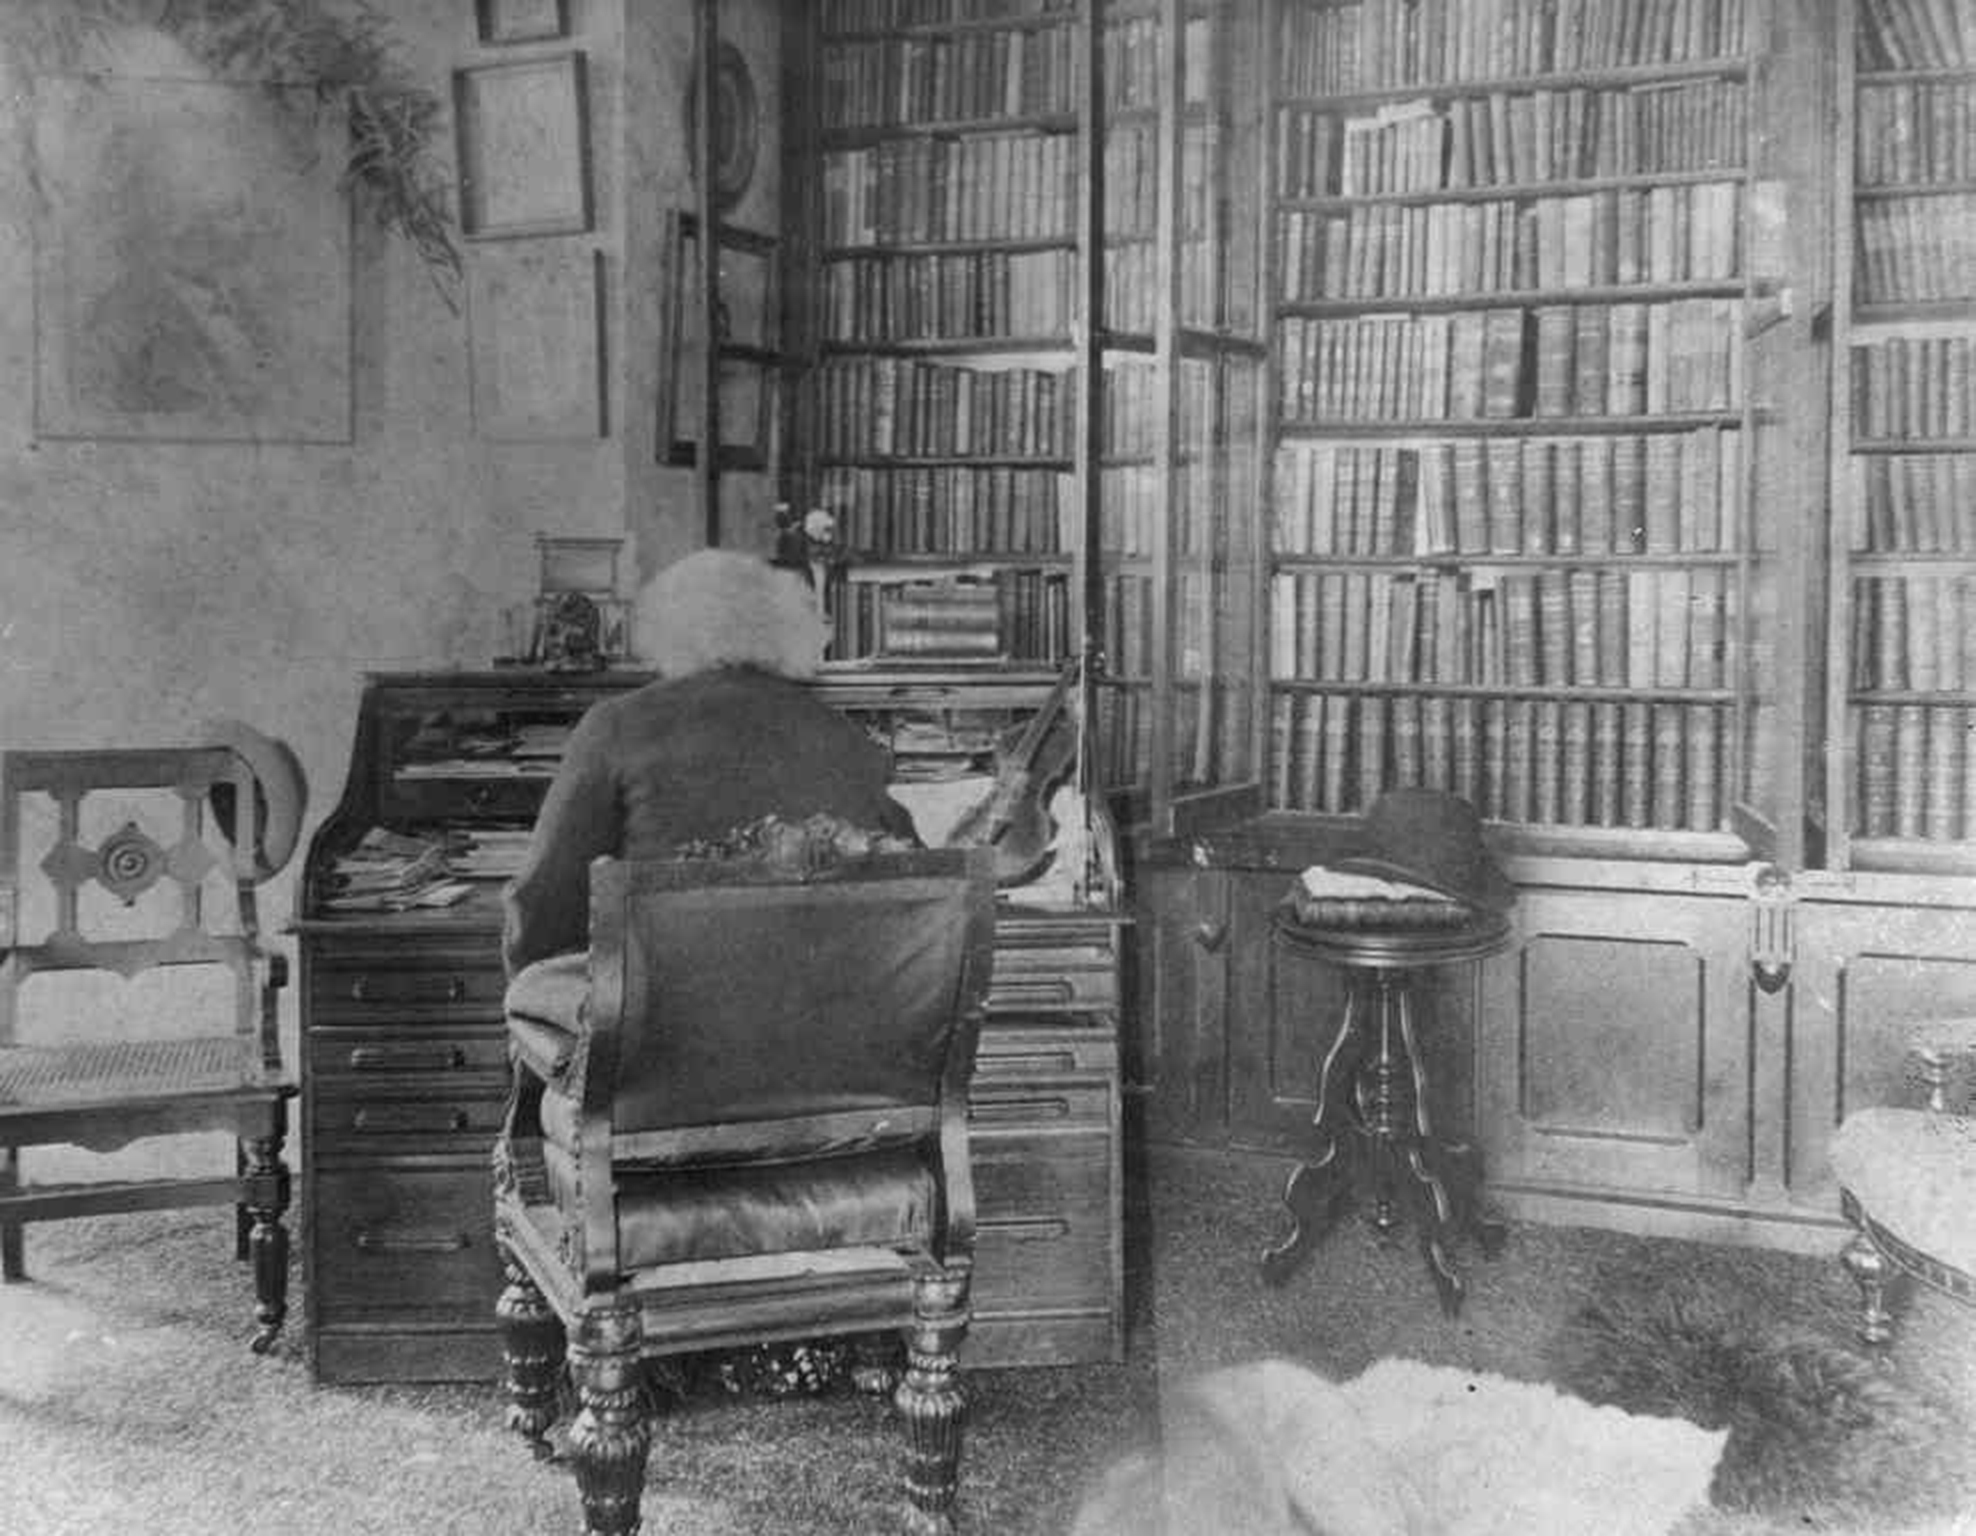 Unknown, Frederick Douglass in his library at Cedar Hill, c. 1893 courtesy National Park Service, Frederick Douglass National Historic Site.